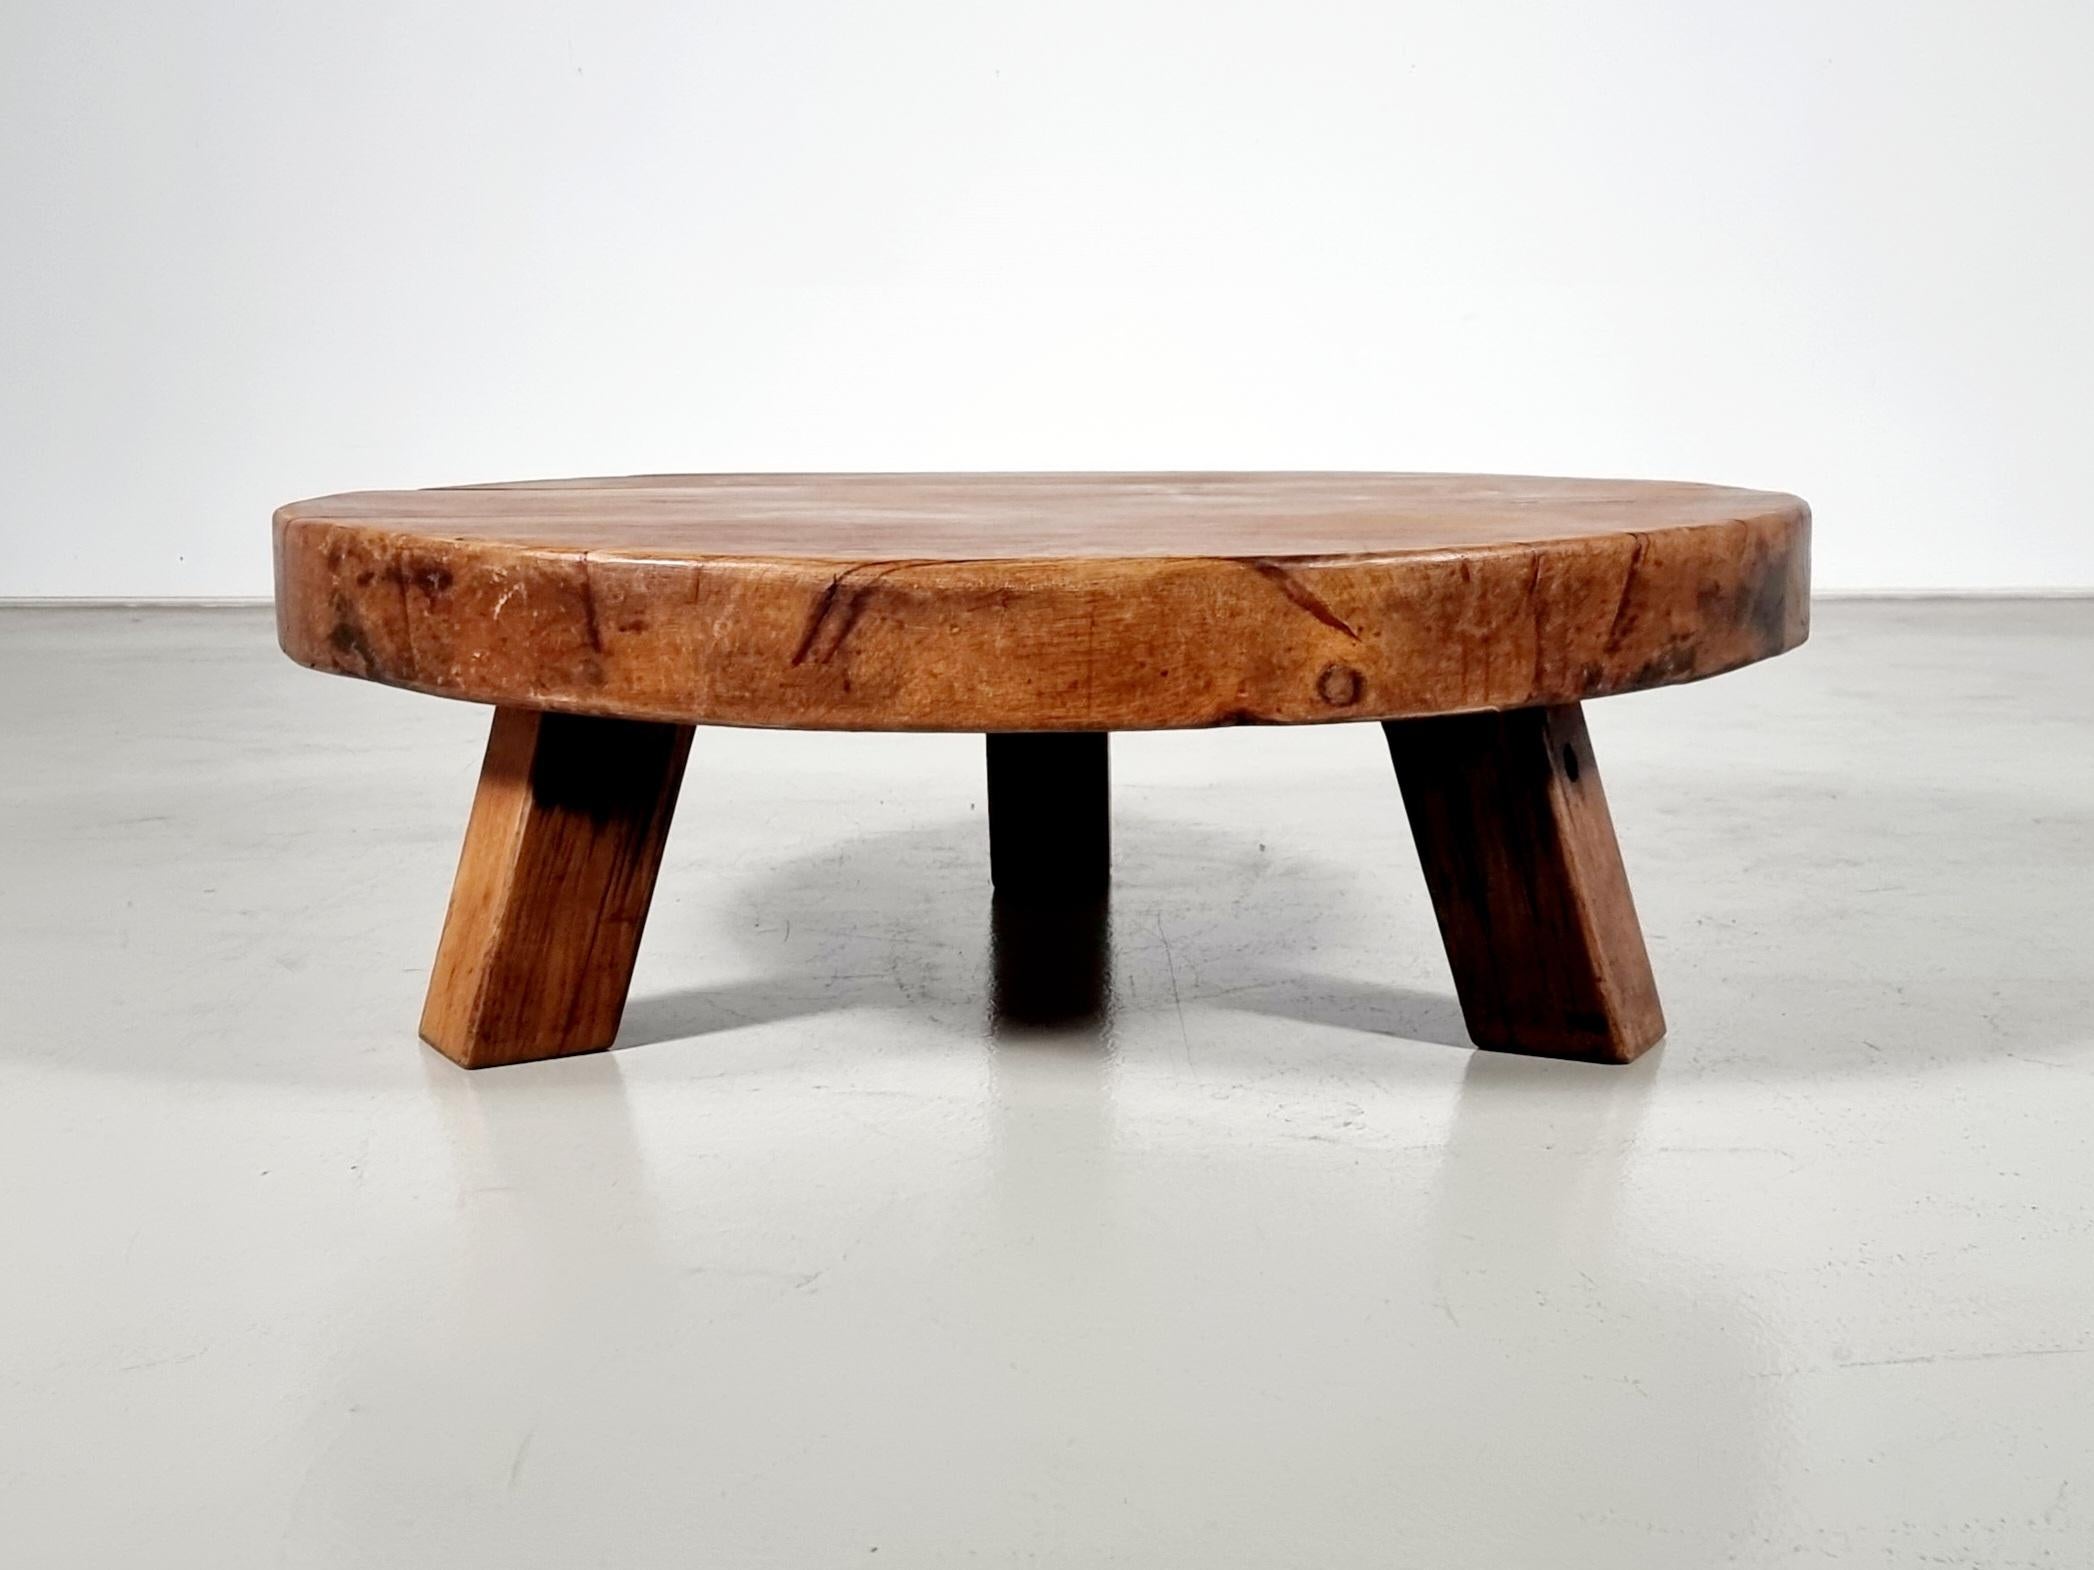 Impressive handmade coffee table in very good original condition.

The table is made of solid French oak.

The thick round top has a beautiful warm color and is made of narrow beams which gives a beautiful effect.

The base is also made of solid oak